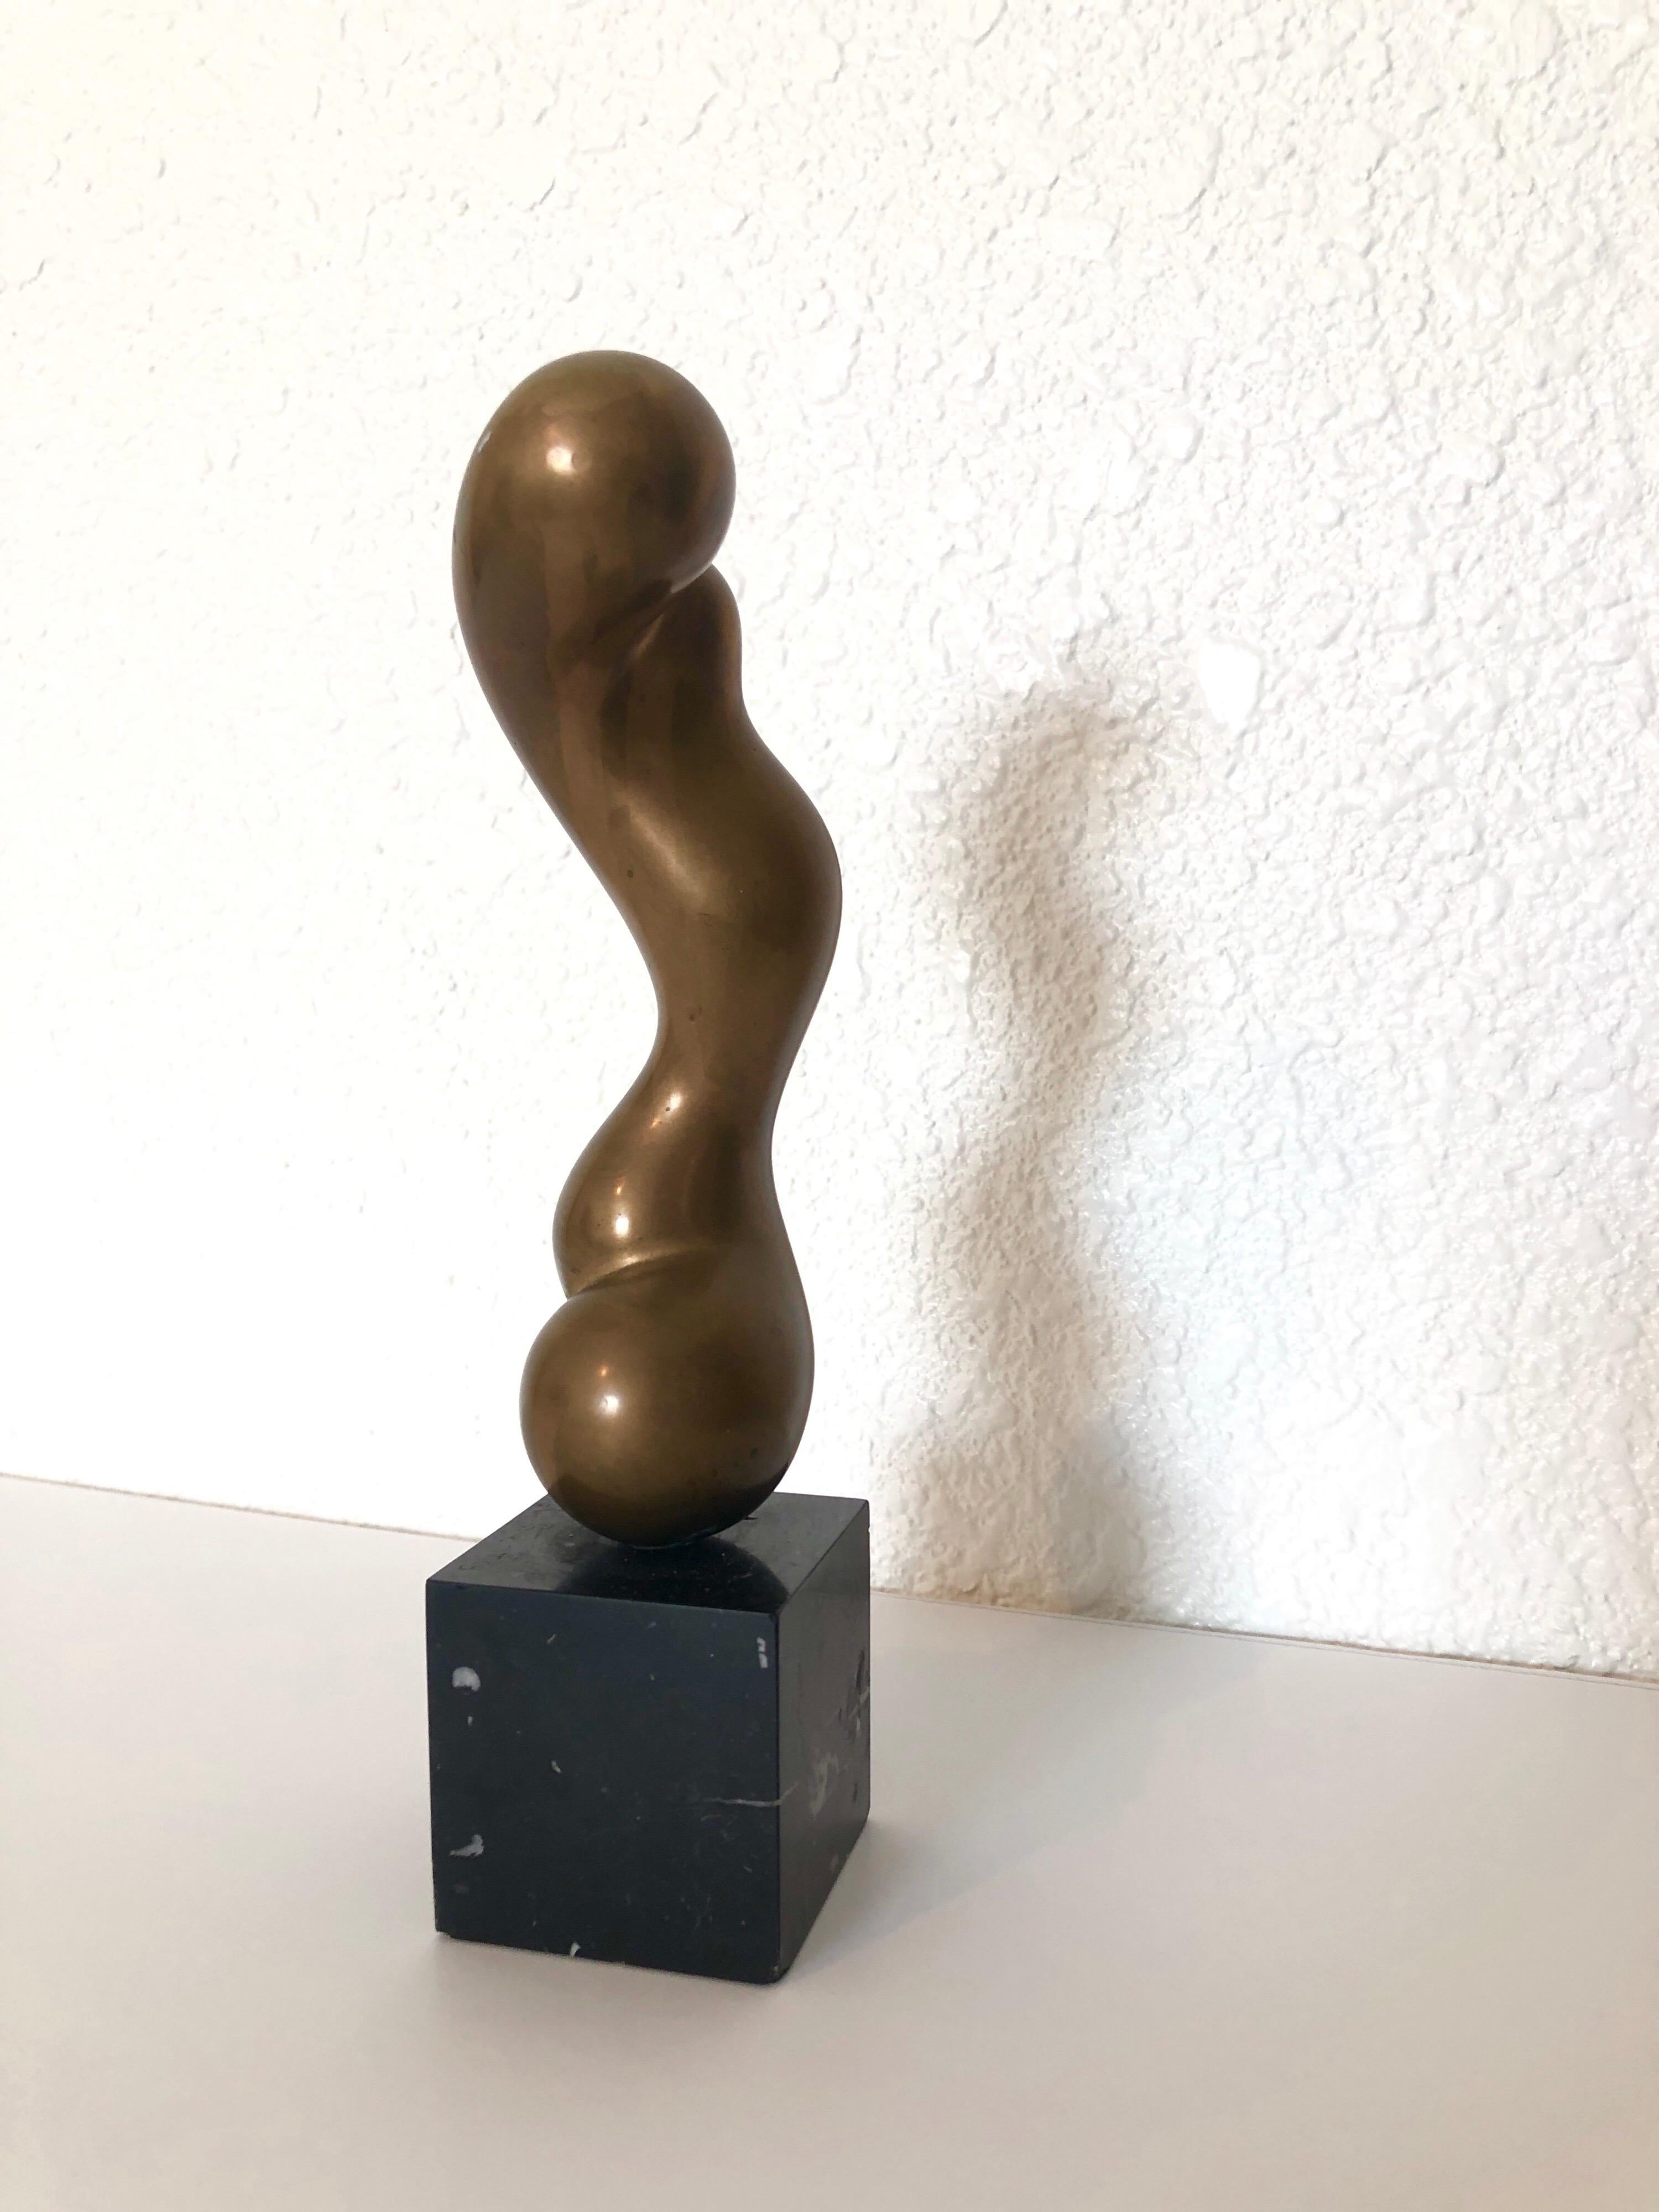 Figural Abstract Bronze Sculpture James Ritchie French Canadian Modernist  8